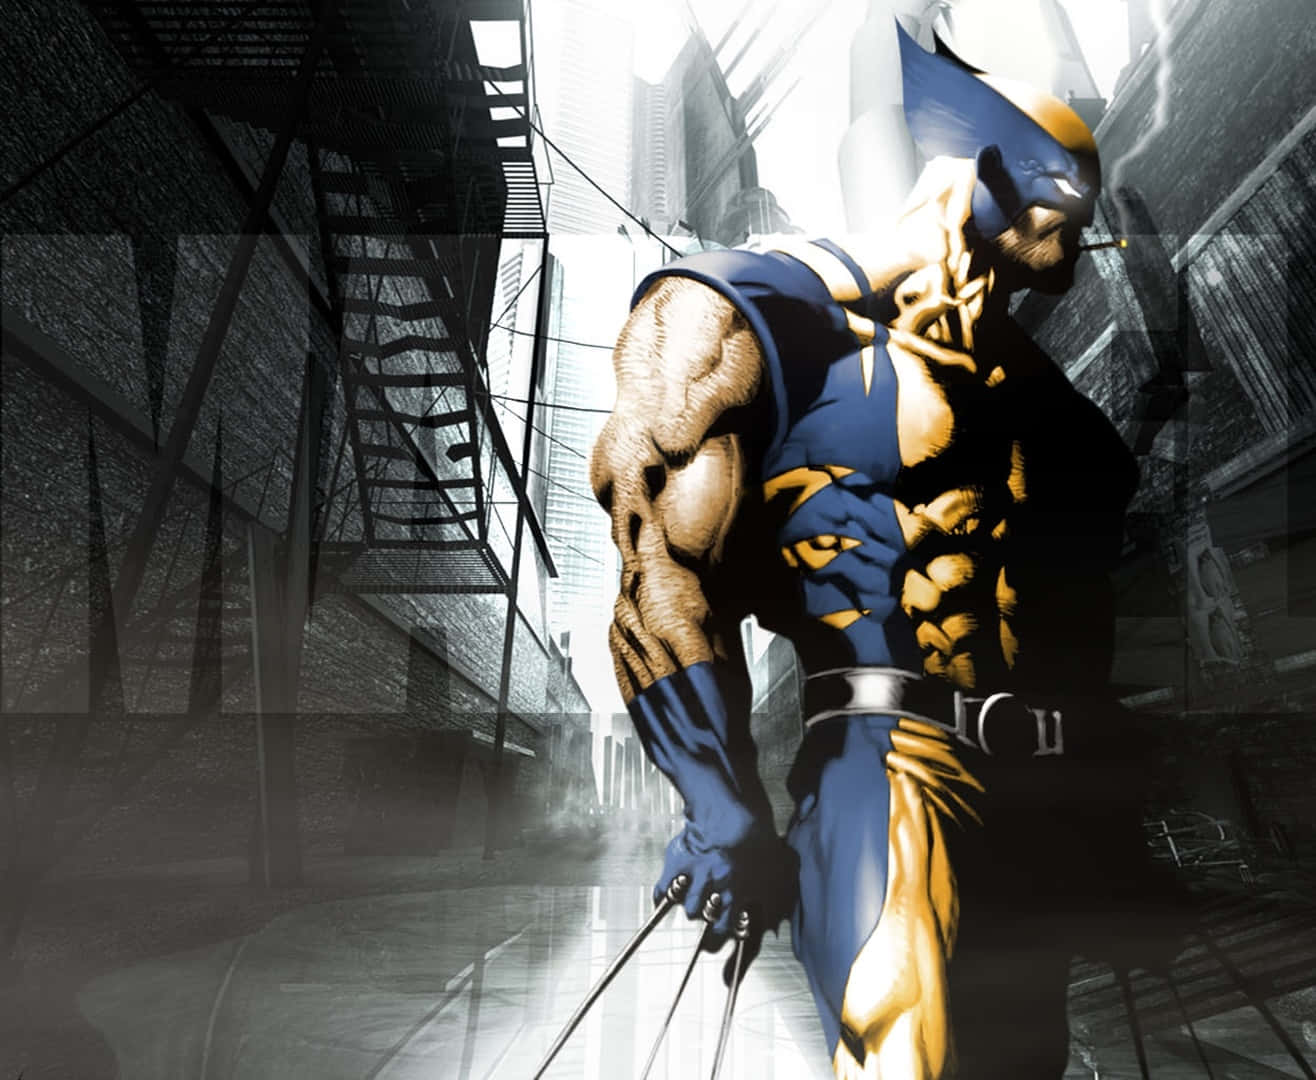 Get Ready To Enter The Twisted World Of Wolverine! Background